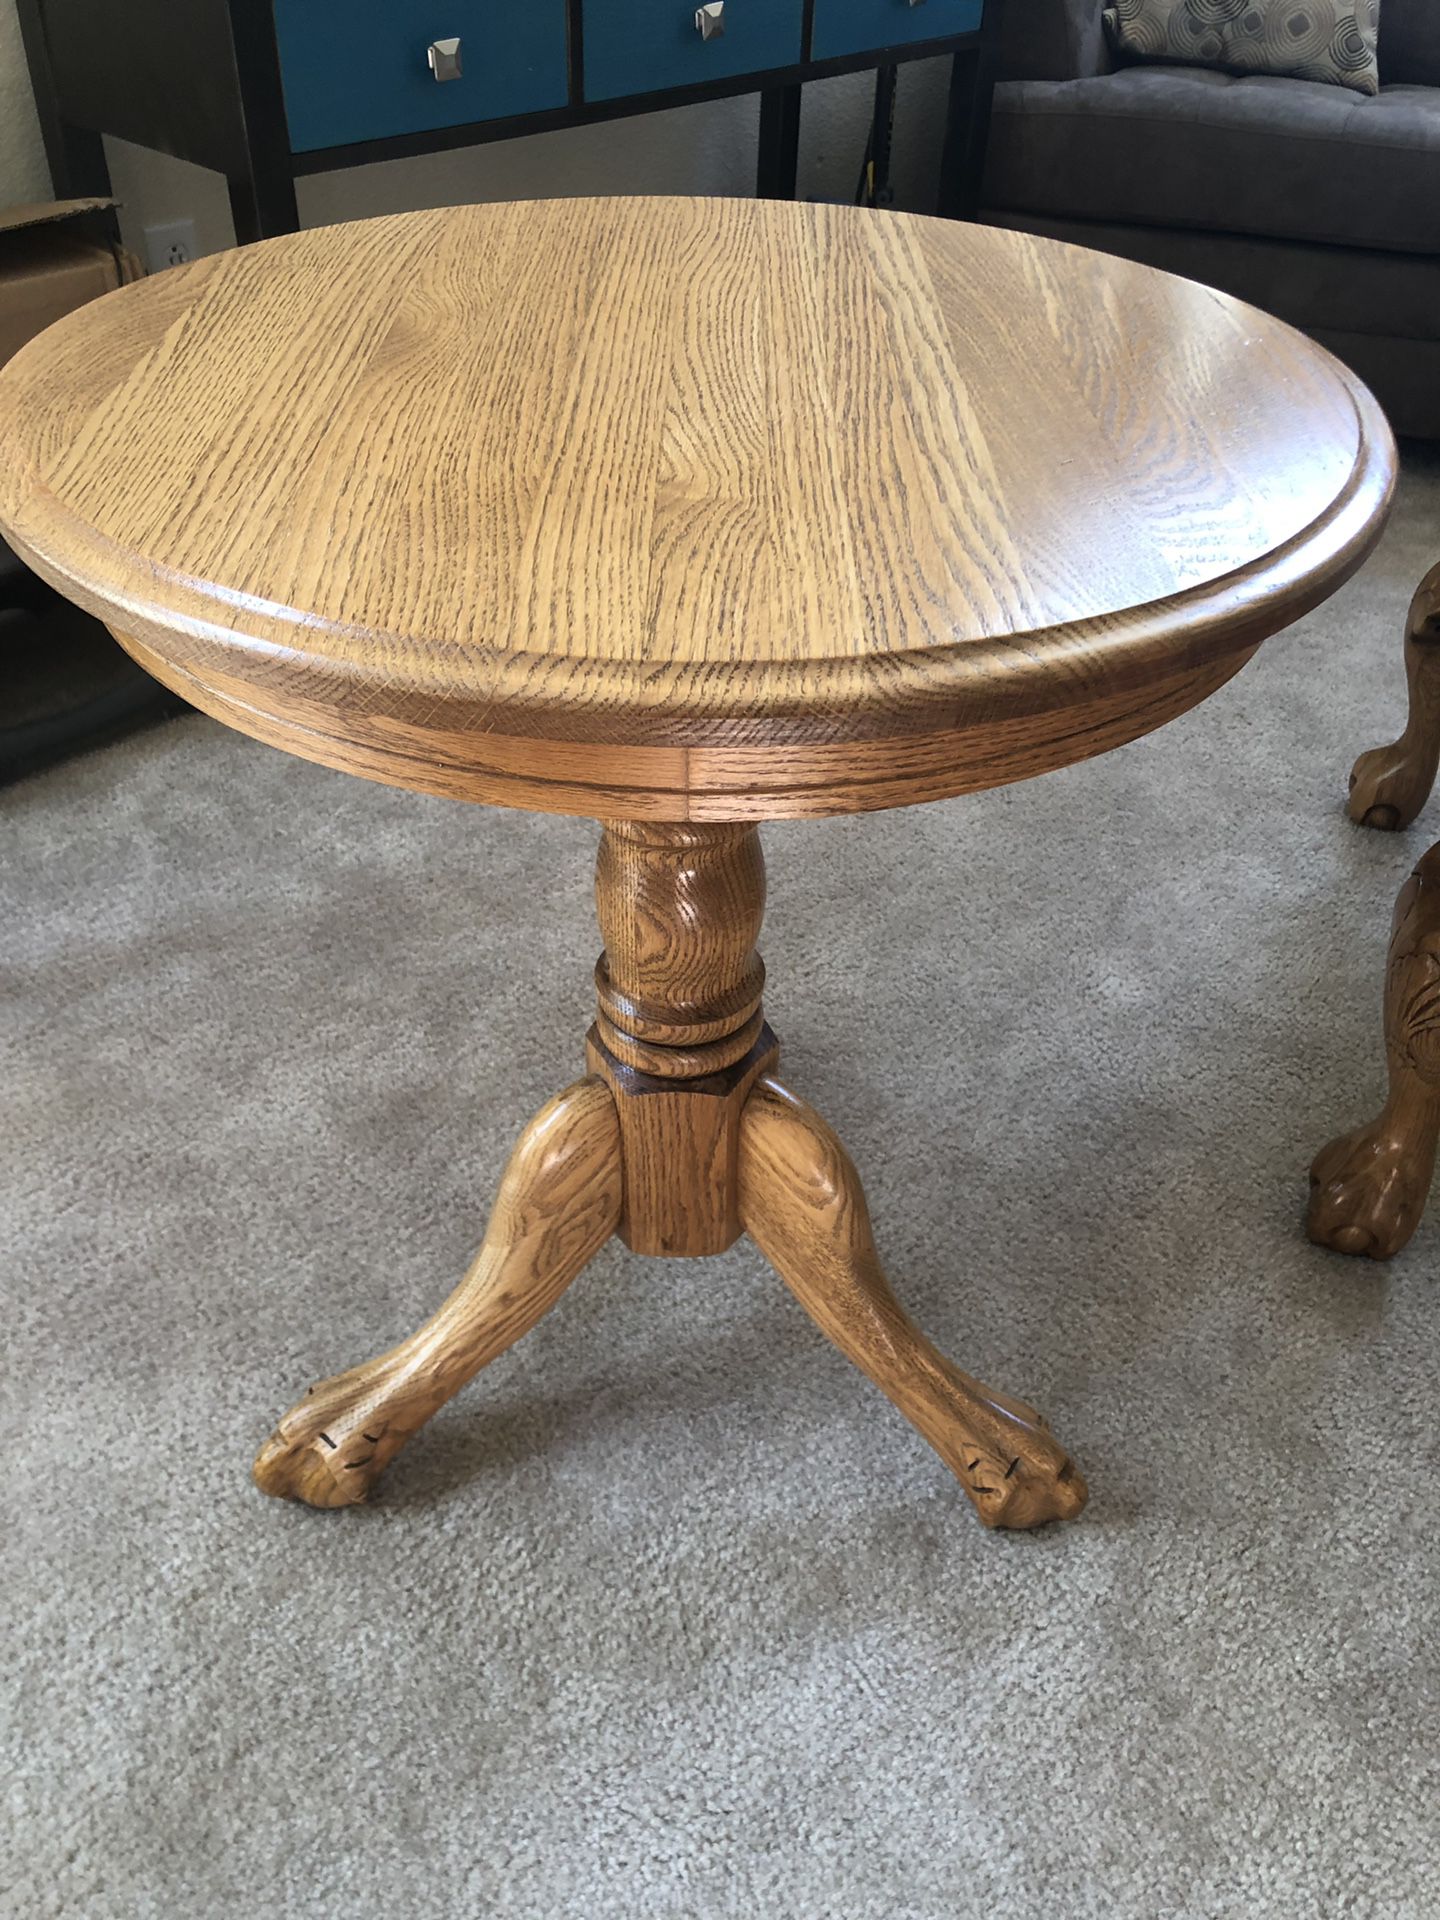 Two wood end tables